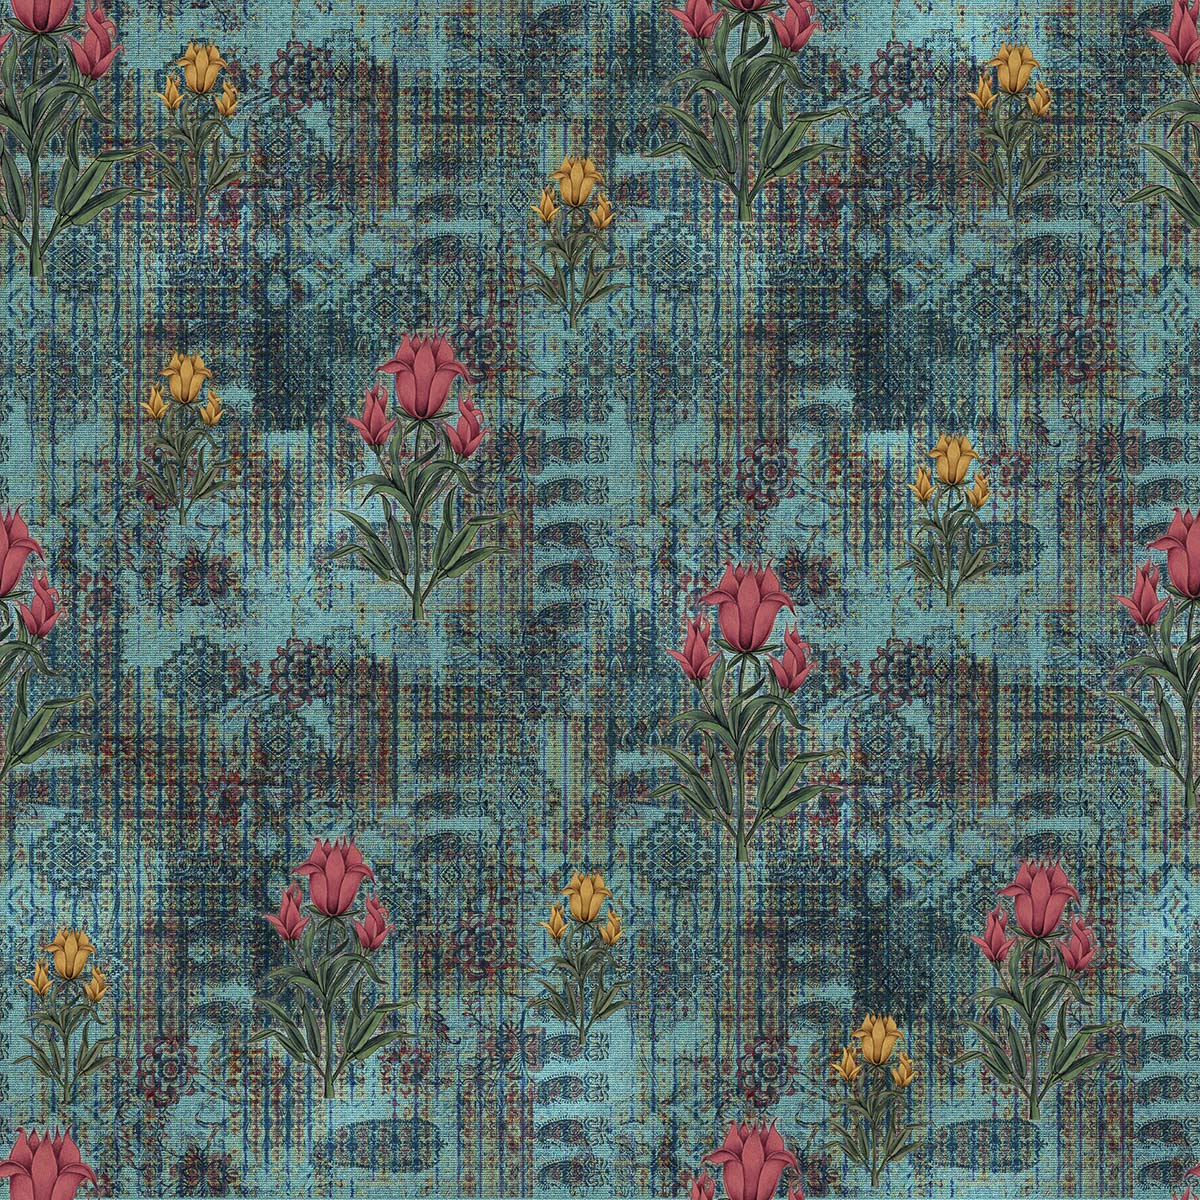 A pattern of flowers on a blue background